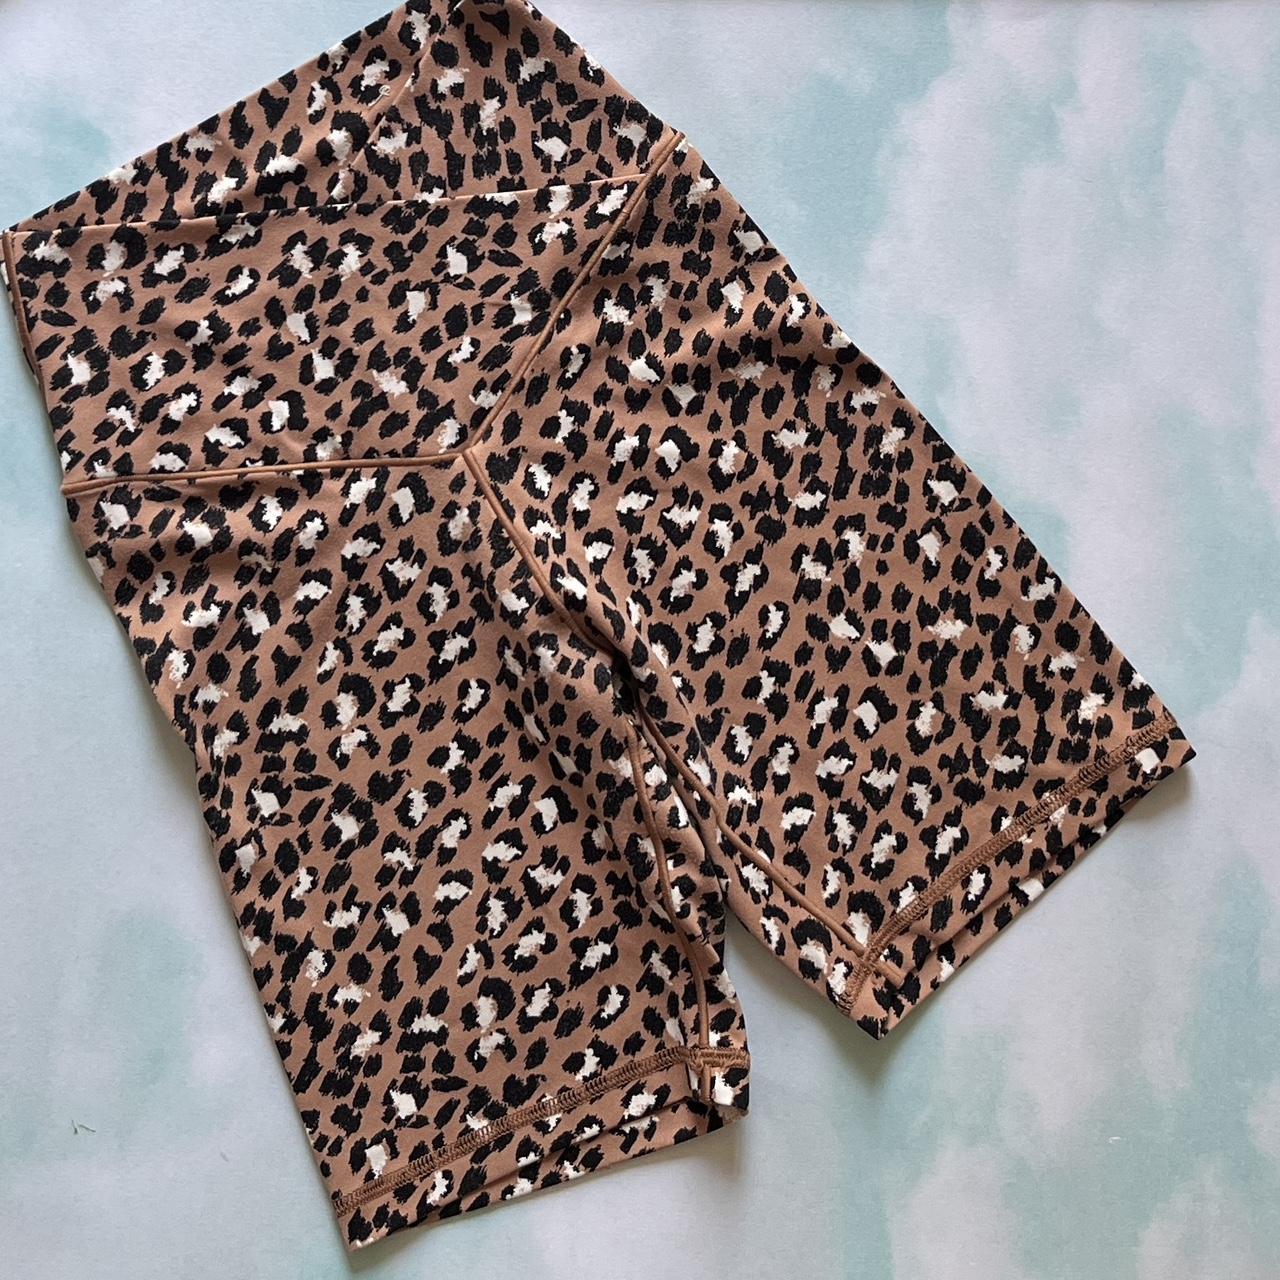 Aerie Chill Play Move Leopard Print Cross Front - Depop